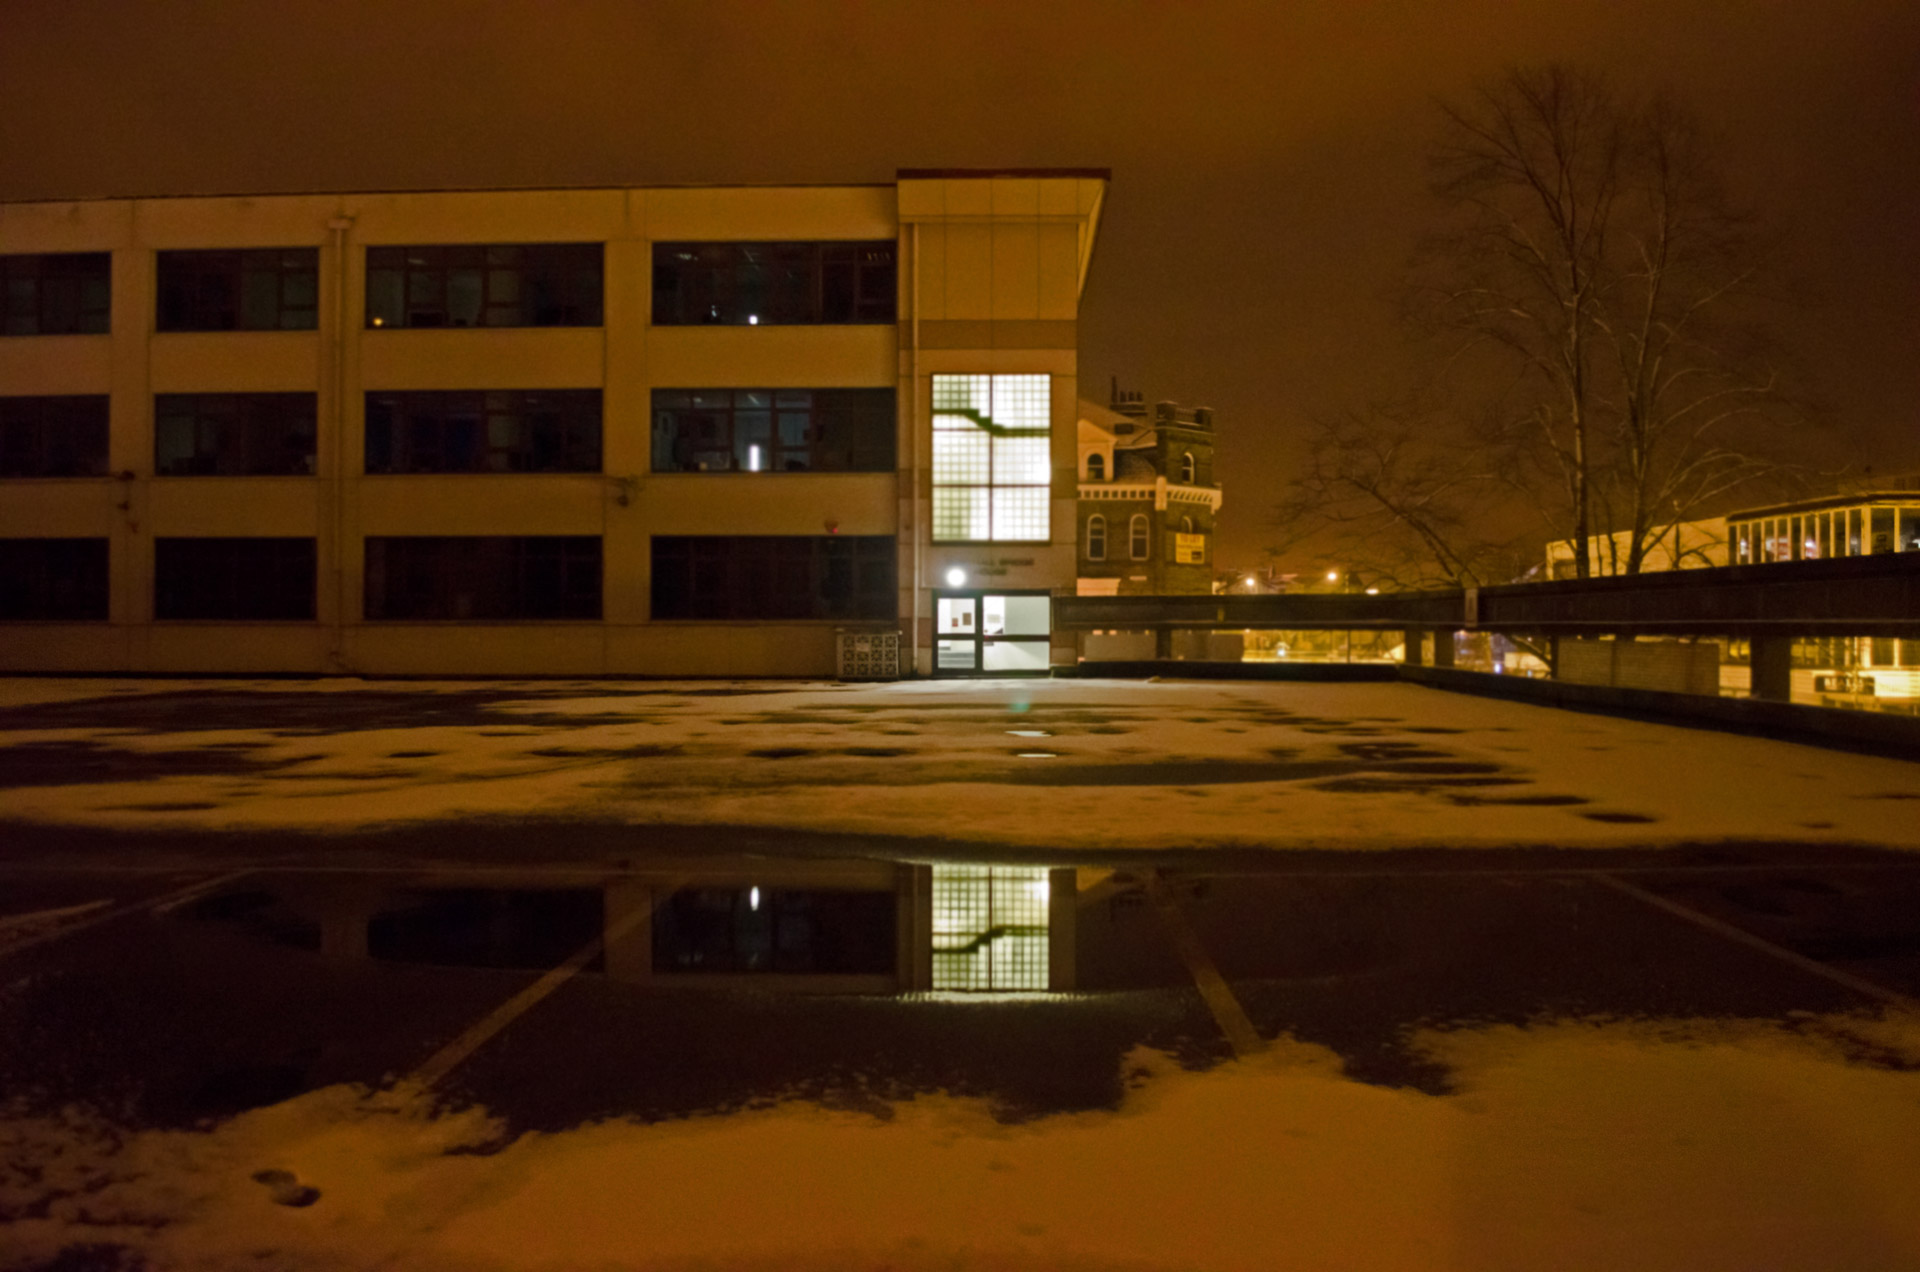 Offices In The Night